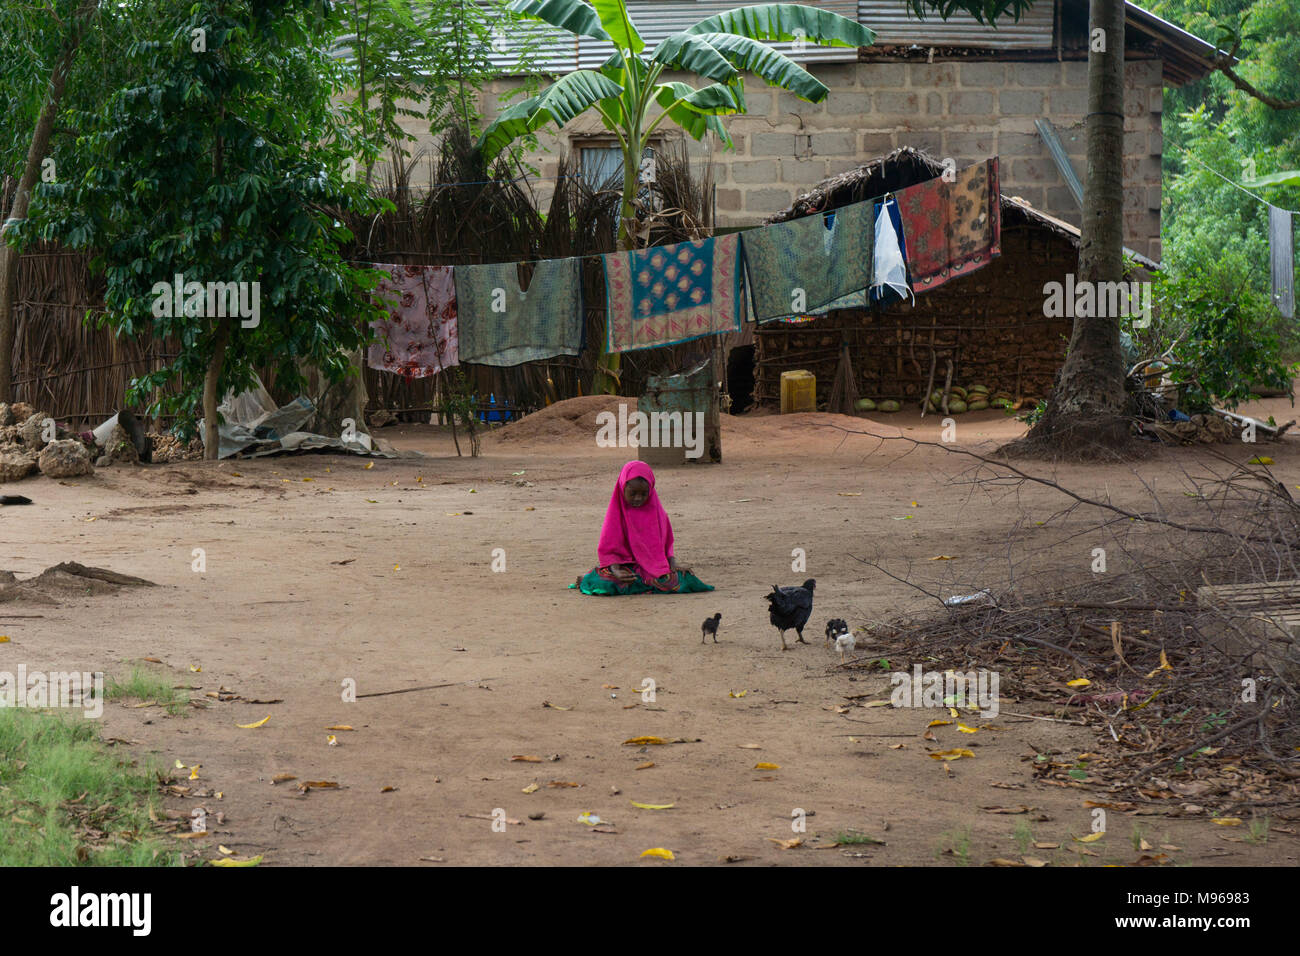 Young African girl looking lonely sitting in a dirt yard in front of the family house with chickens running around. Stock Photo